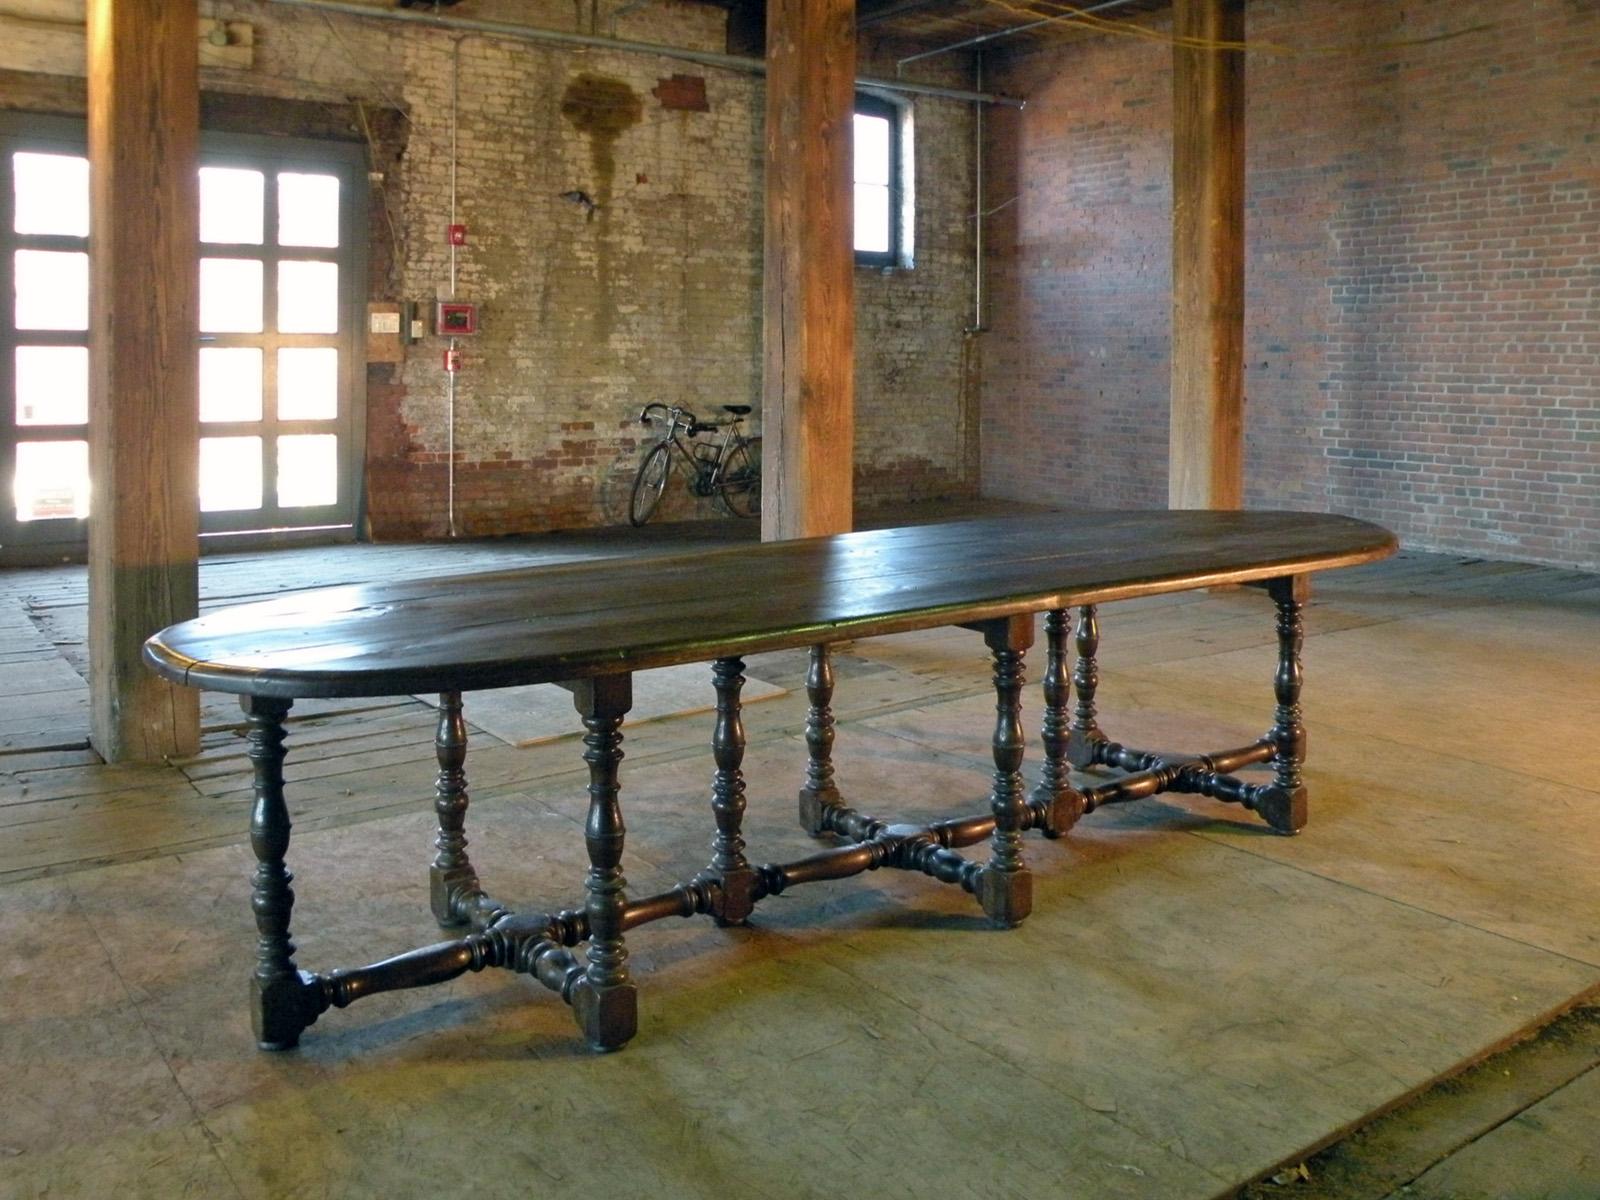 Exceptional, Large 17th Century Dining Table of unique and conceptual design.
The over 11 feet long, massive three-board top with rounded ends supported by ten turned legs joined by conforming turned and beautifully worn down cross-stretchers.
Deep